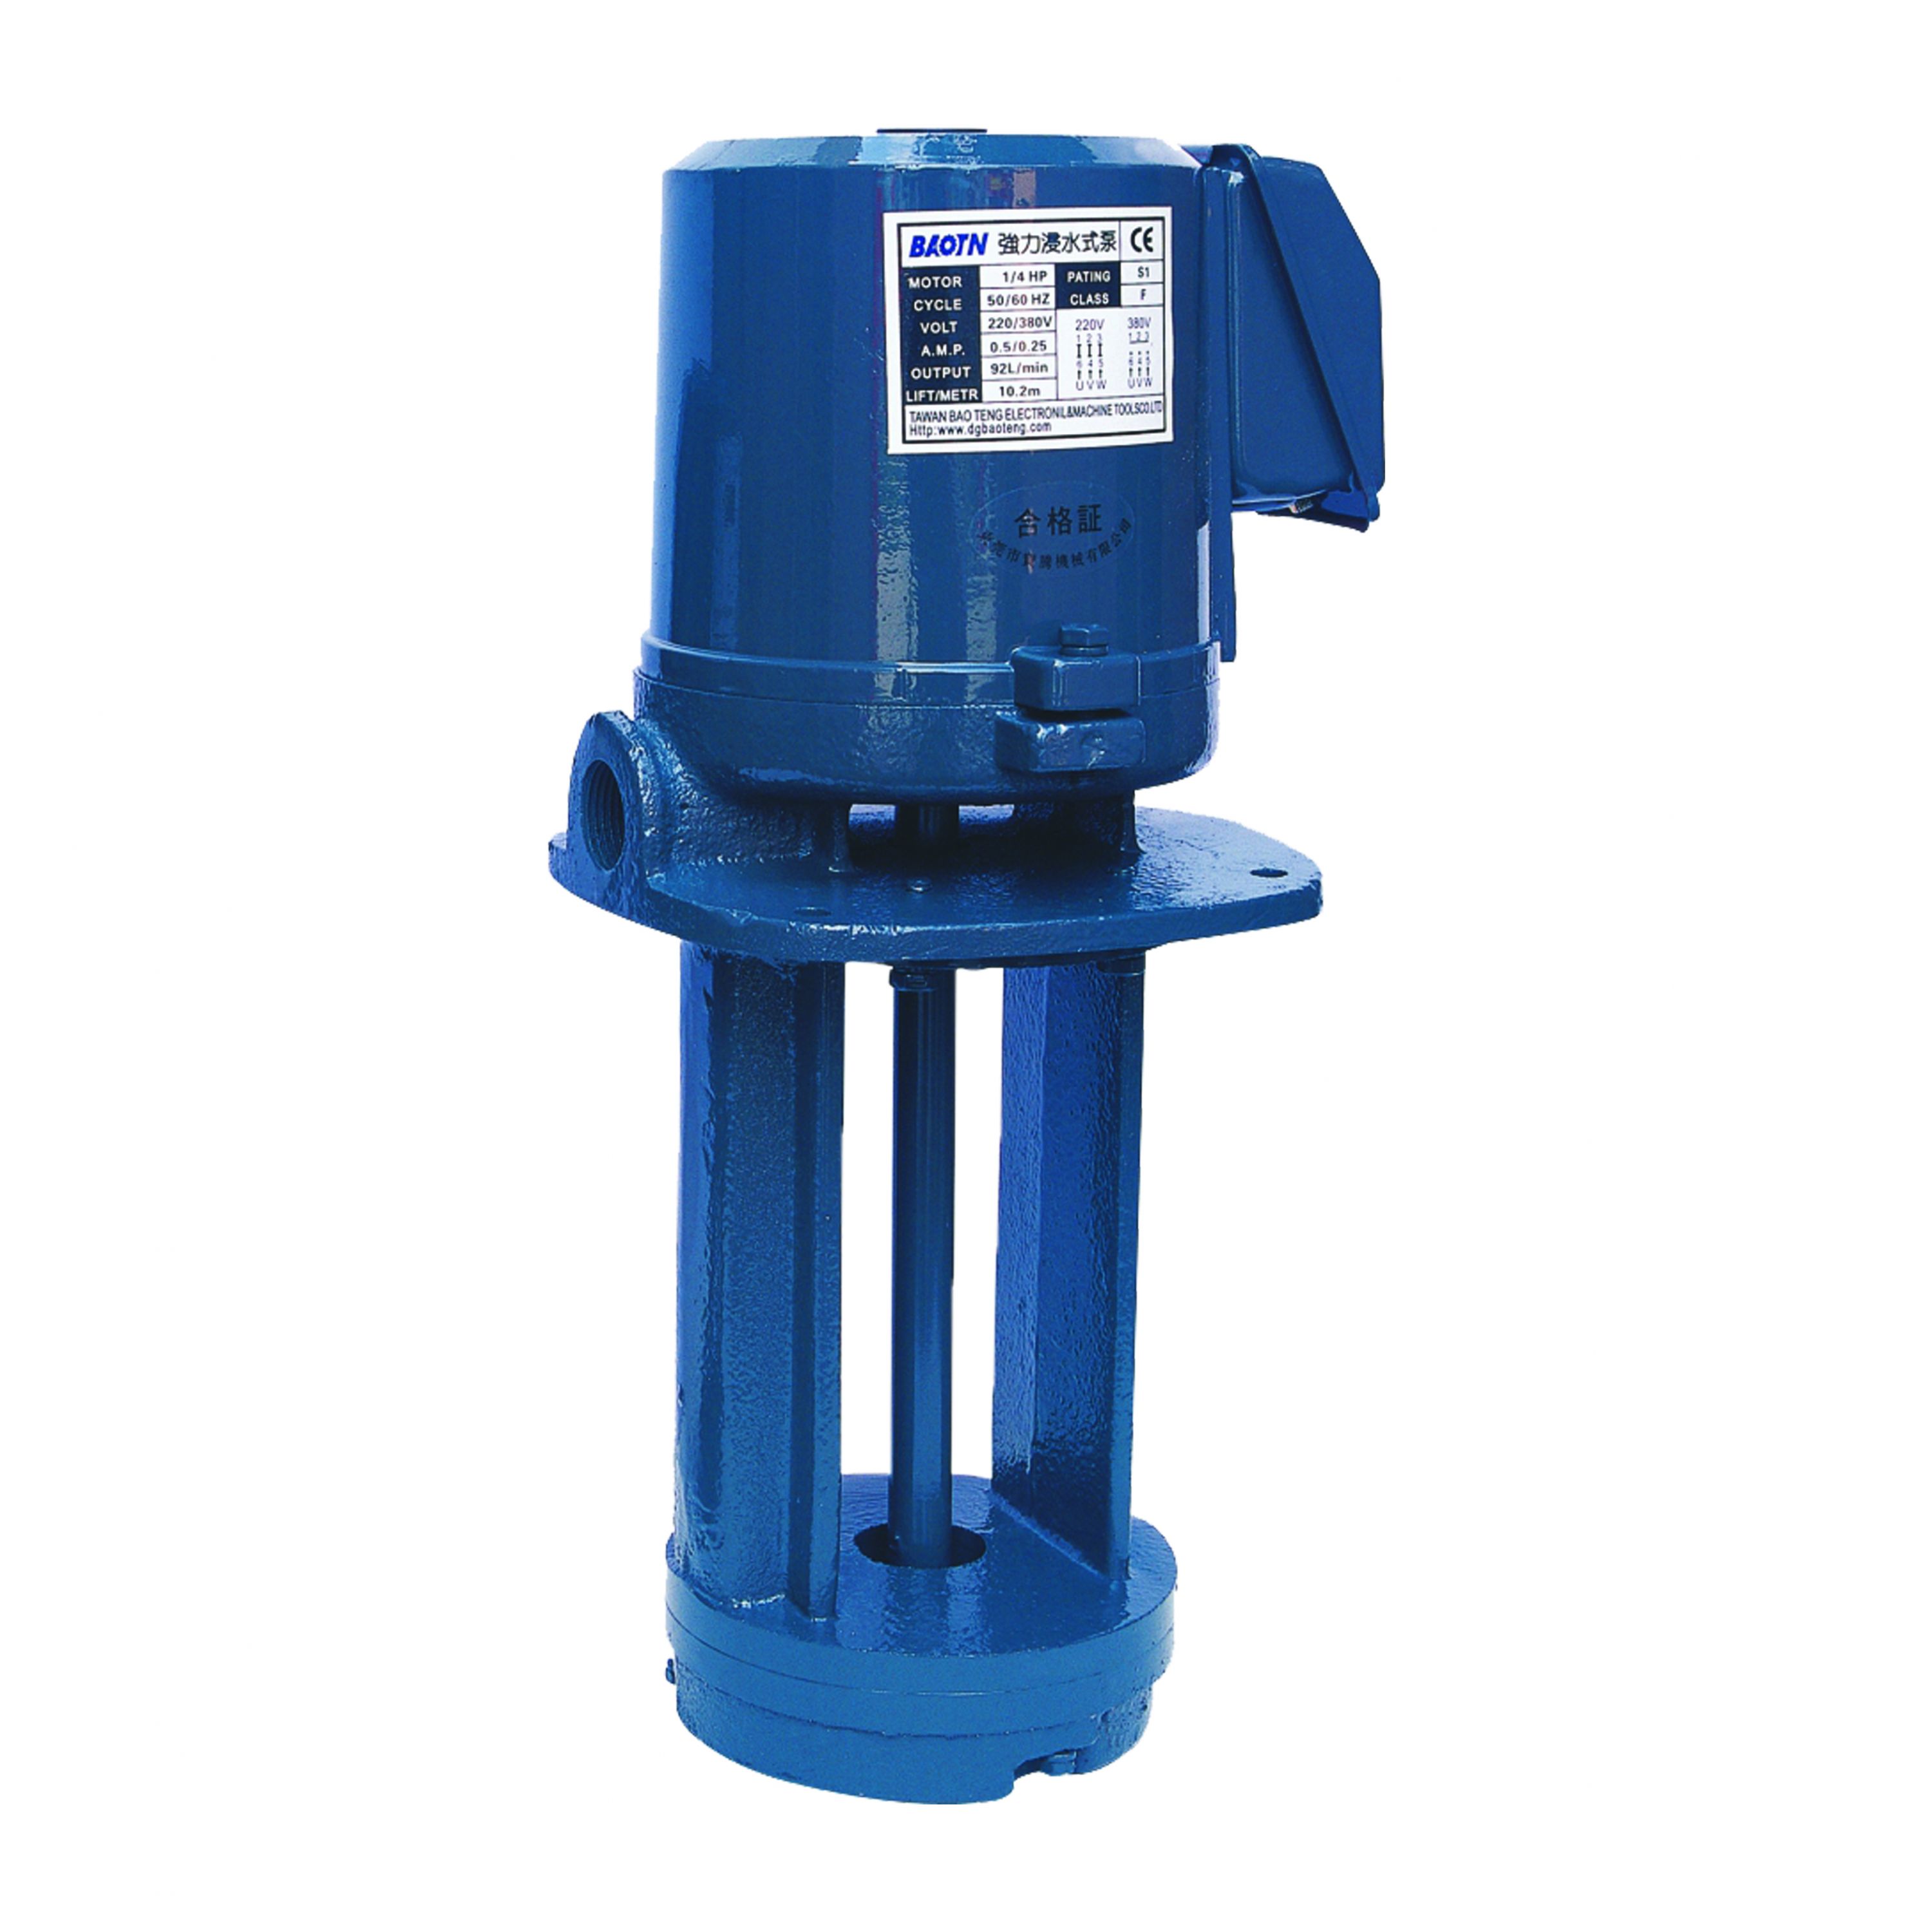 forced submerging pump